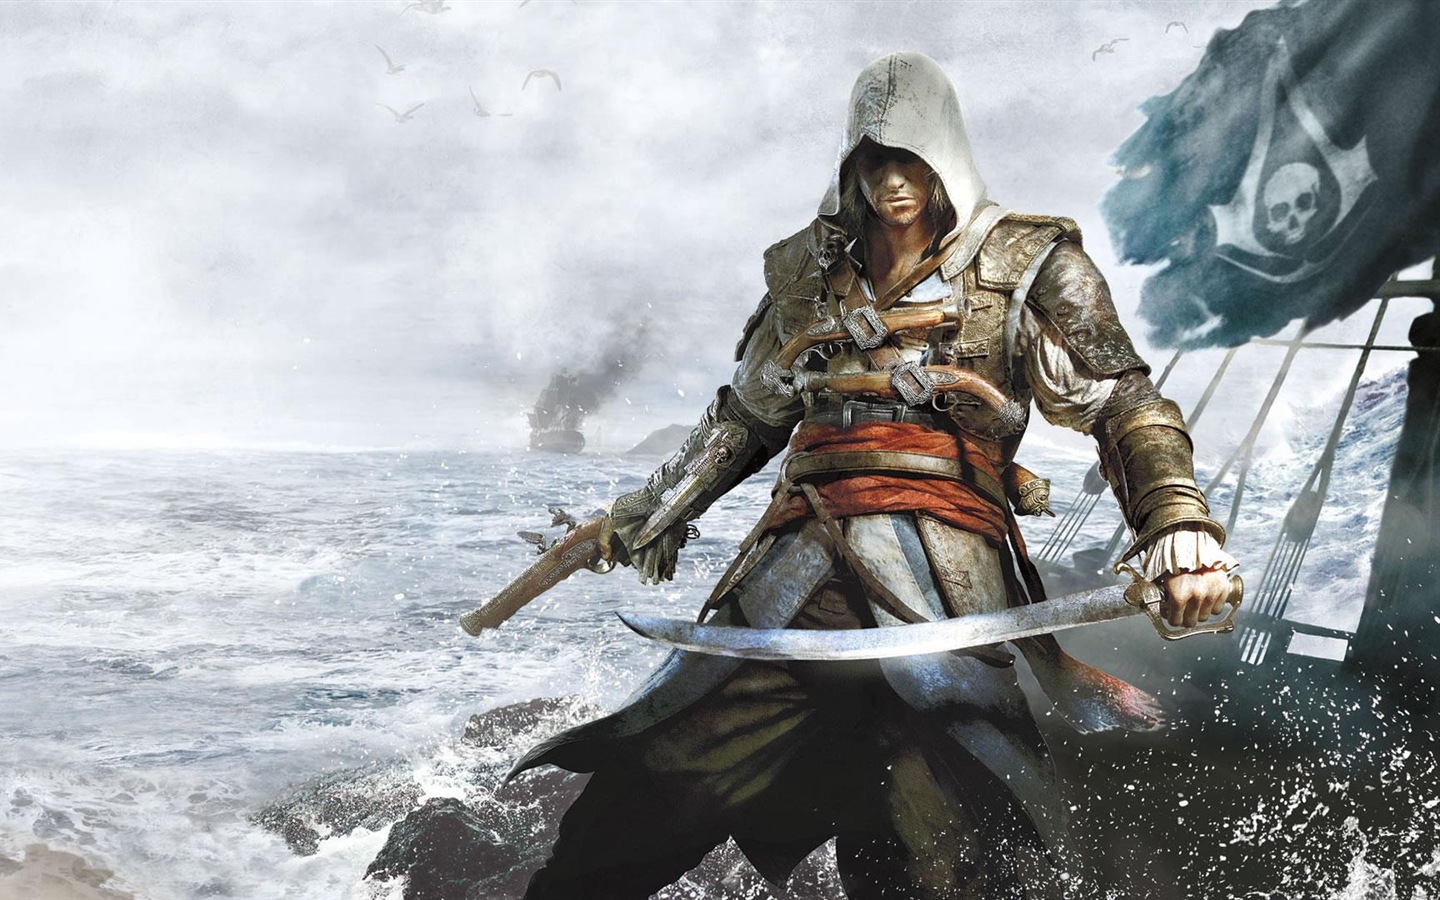 Creed IV Assassin: Black Flag HD wallpapers #7 - 1440x900